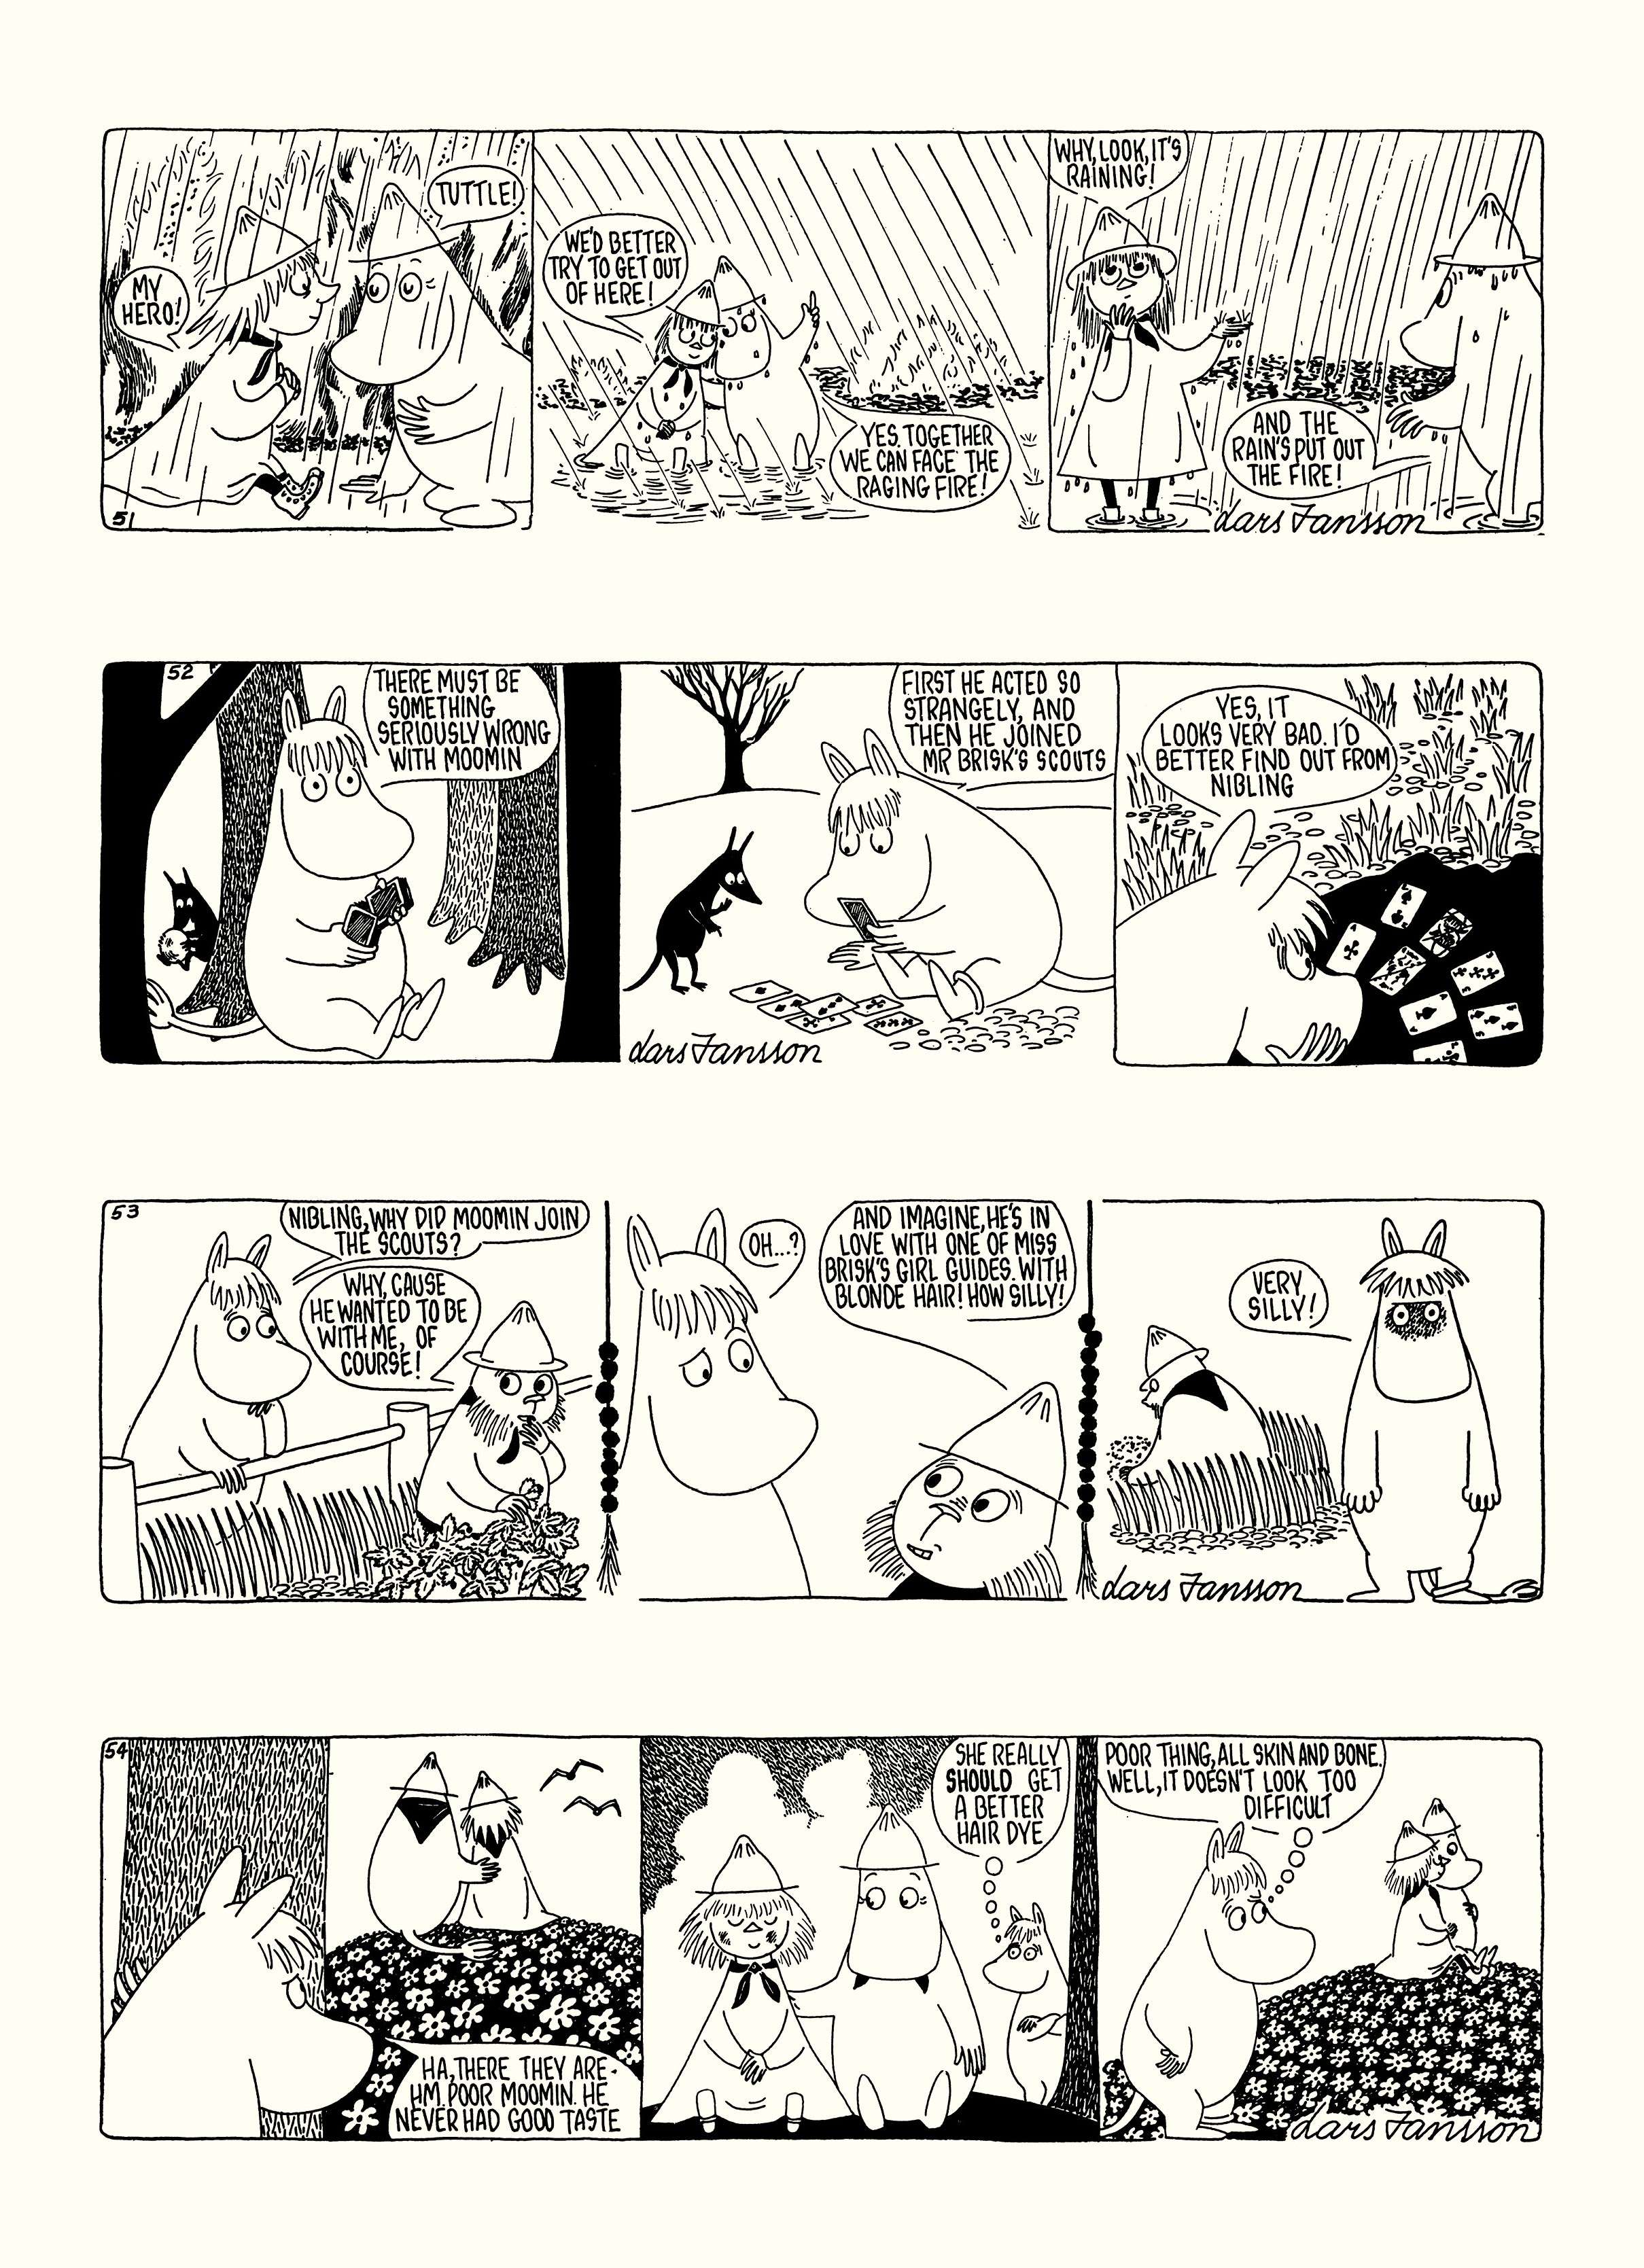 Read online Moomin: The Complete Lars Jansson Comic Strip comic -  Issue # TPB 7 - 40